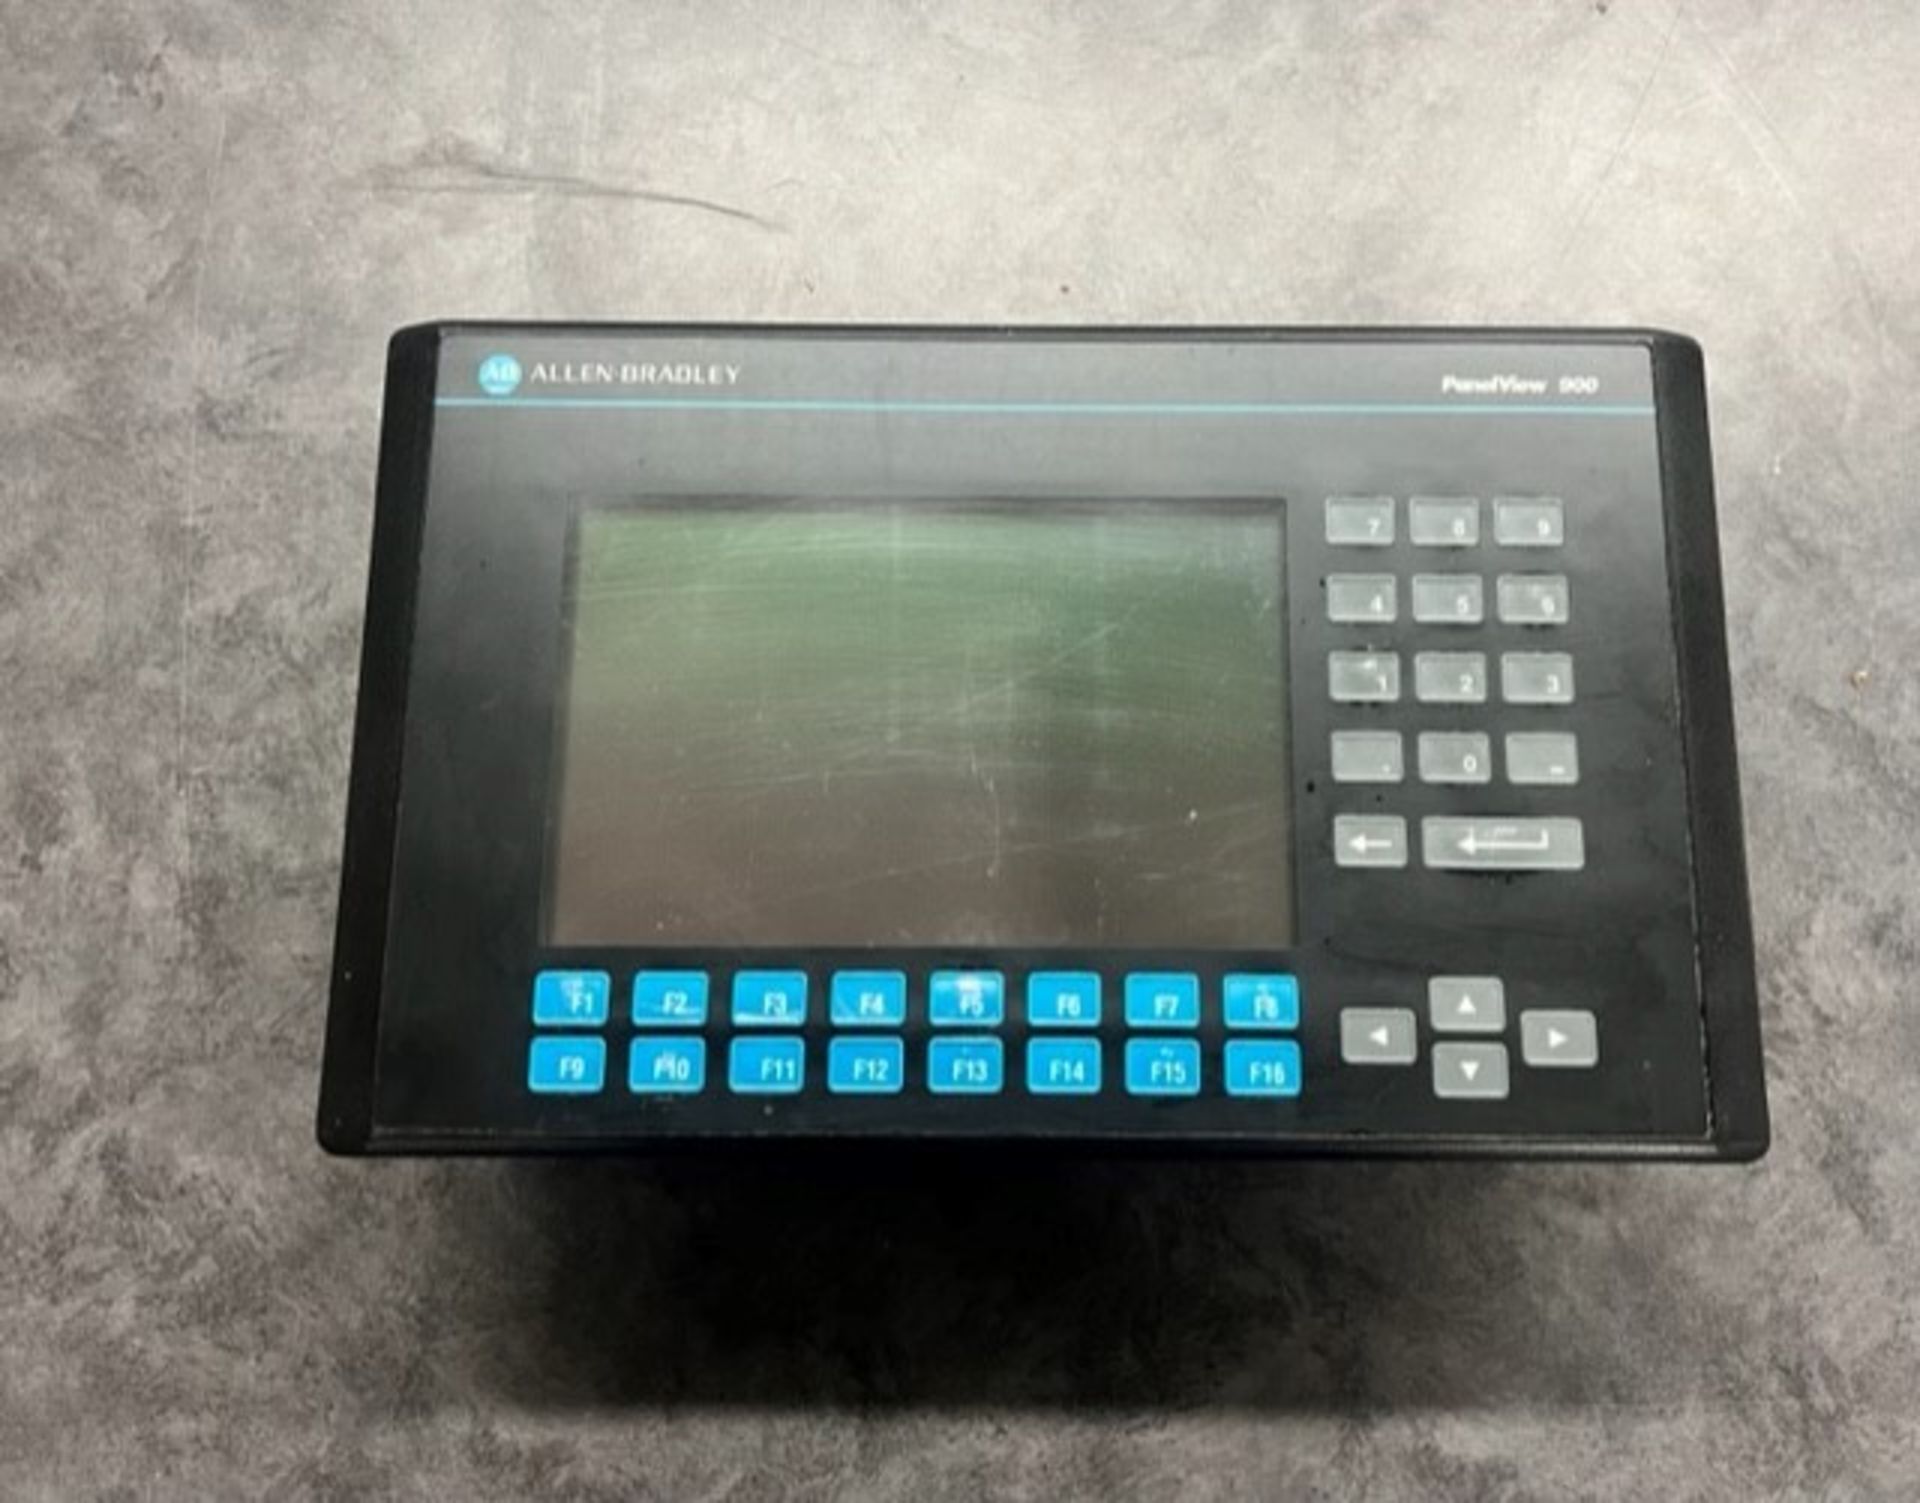 Allen Bradley PanelView 900 Touchpad Display Screen, CAT #2711-K9A1, REV A, Series B (Load Fee